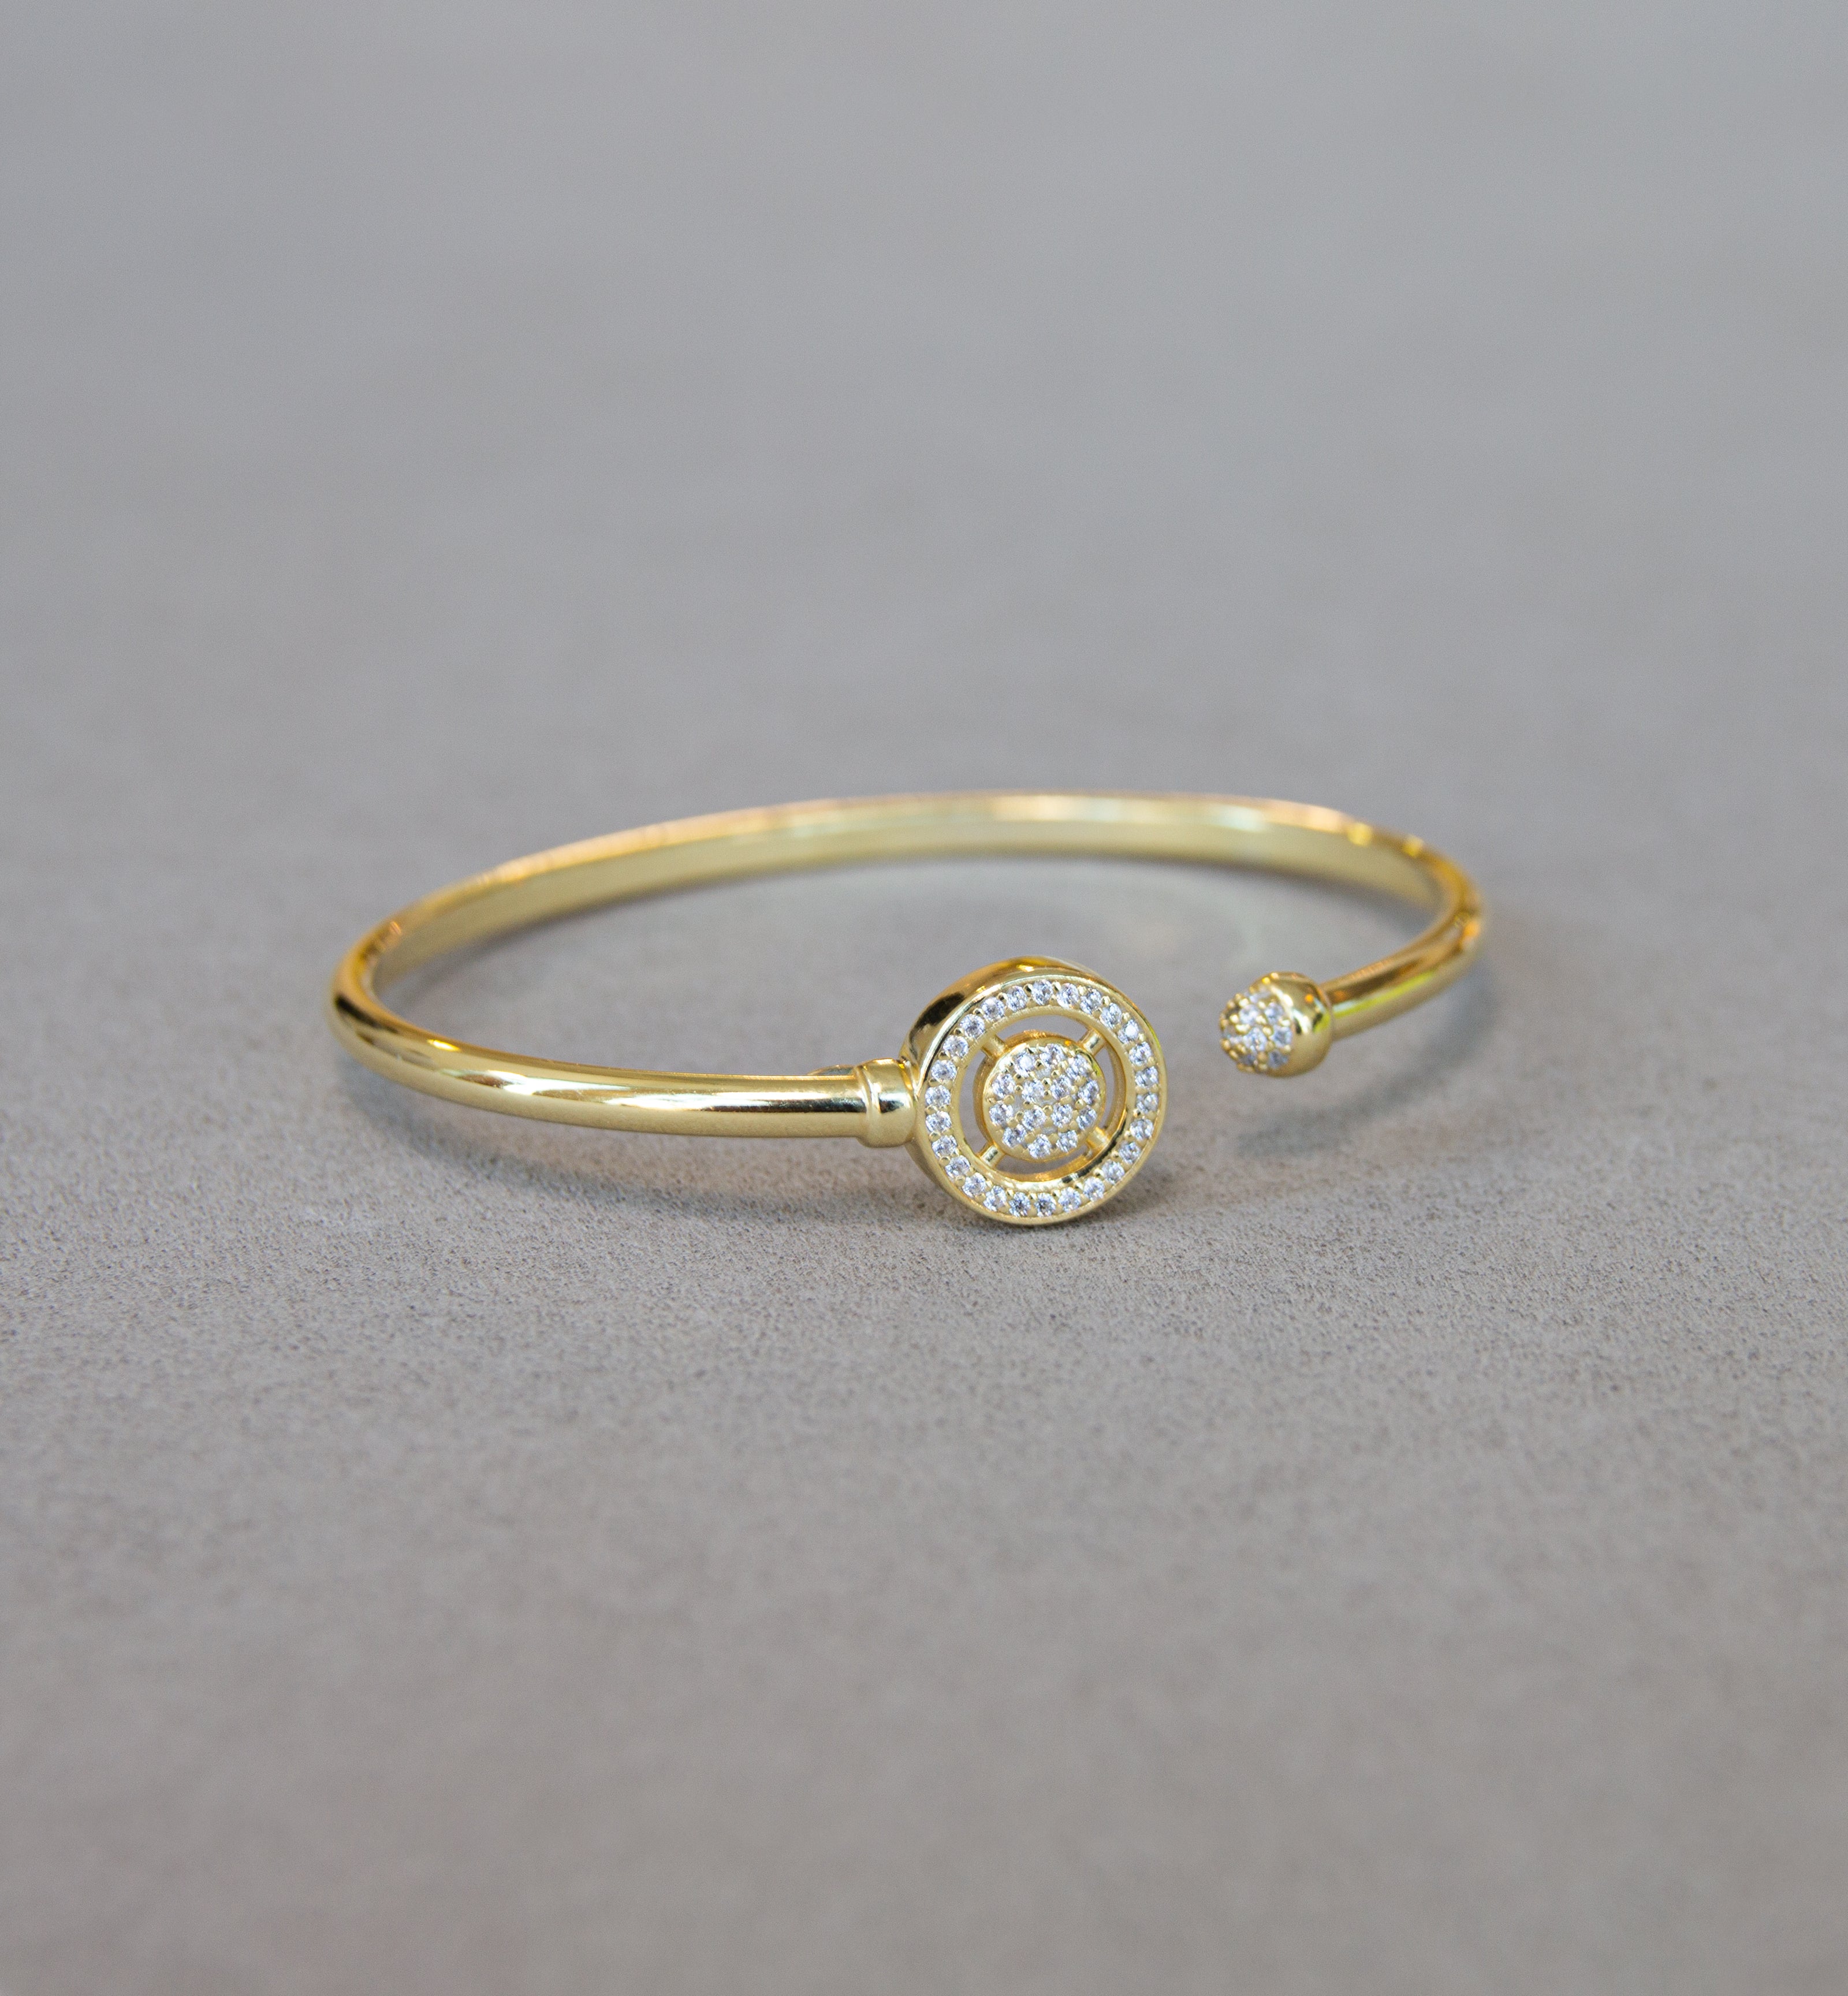 Silver 925 Yellow Gold Plated Bangle with Cubic Zircon Stones